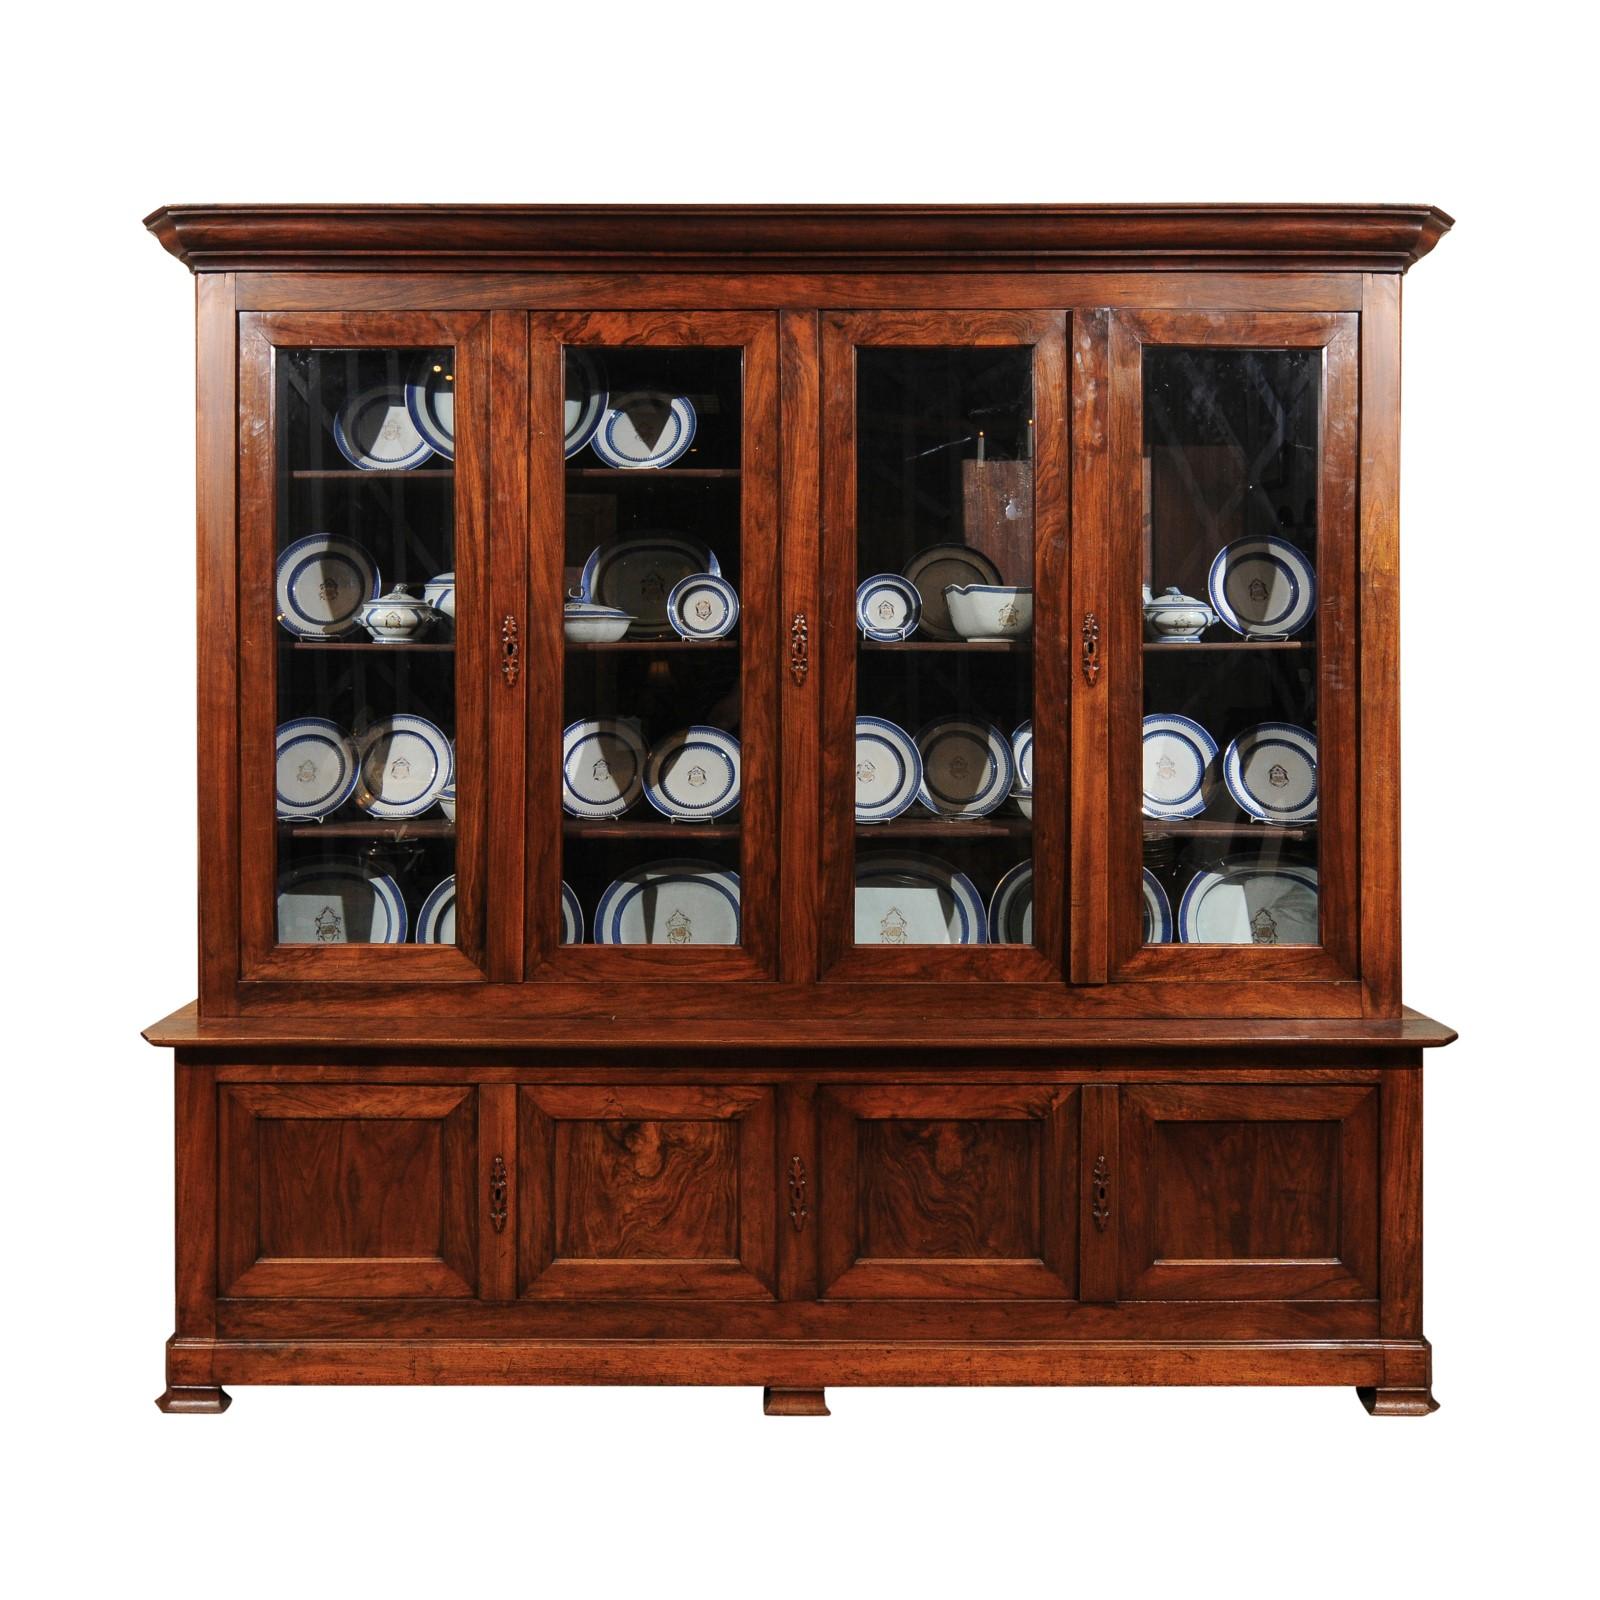 The French Louis Philippe walnut bookcase with 4 glass paneled doors above 4 cabinet doors below. 

 